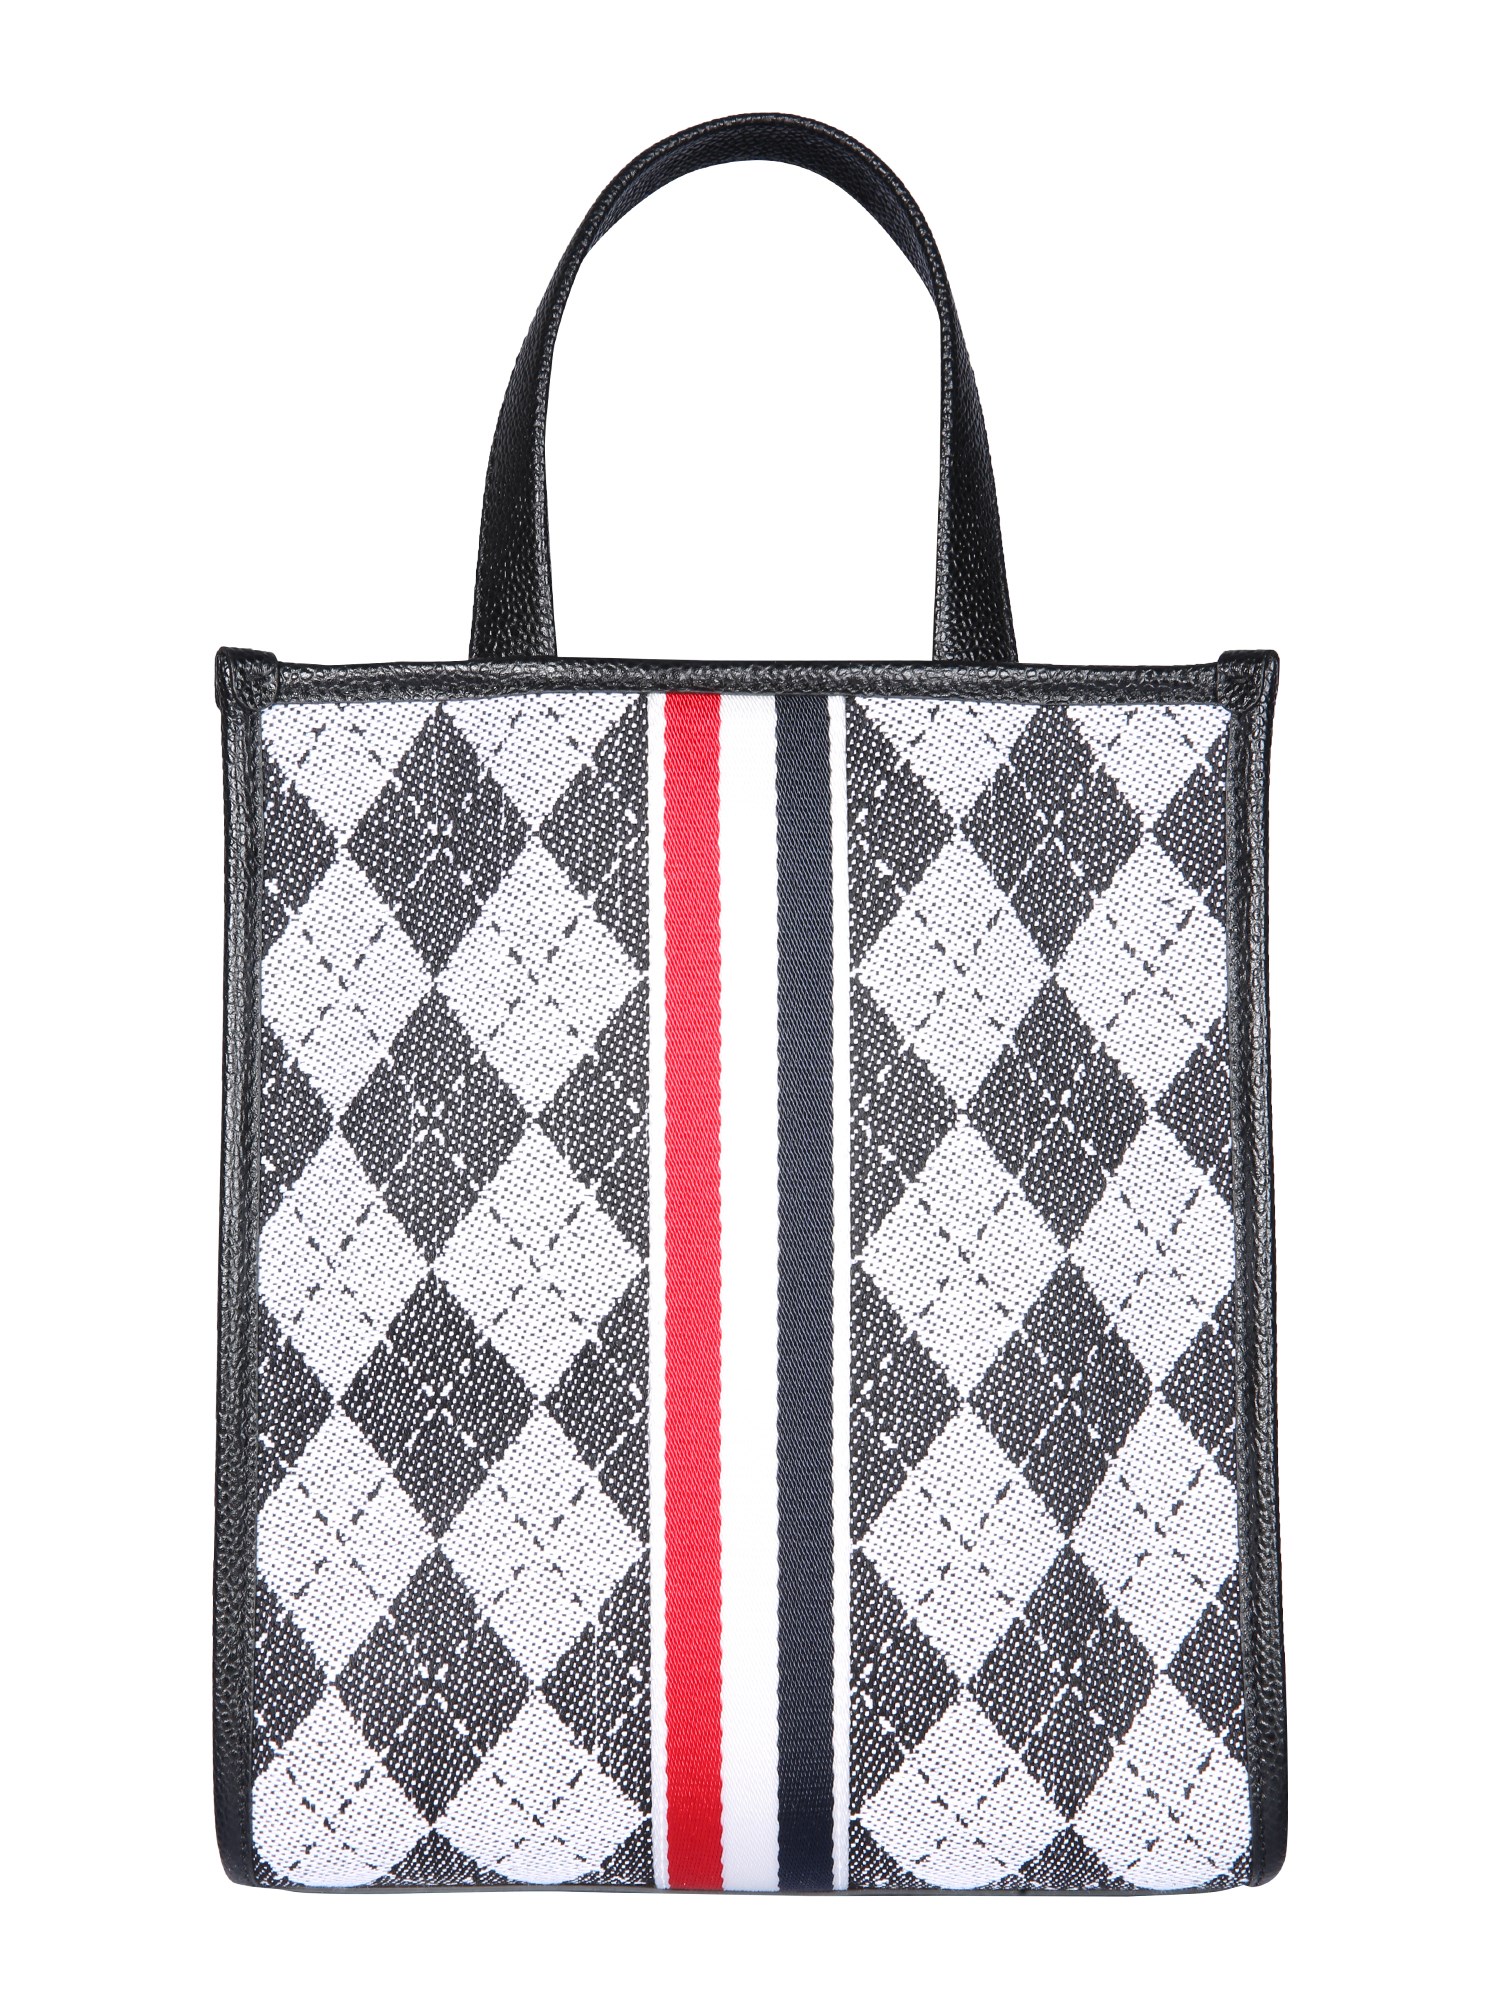 thom browne tote bag with small shoulder strap